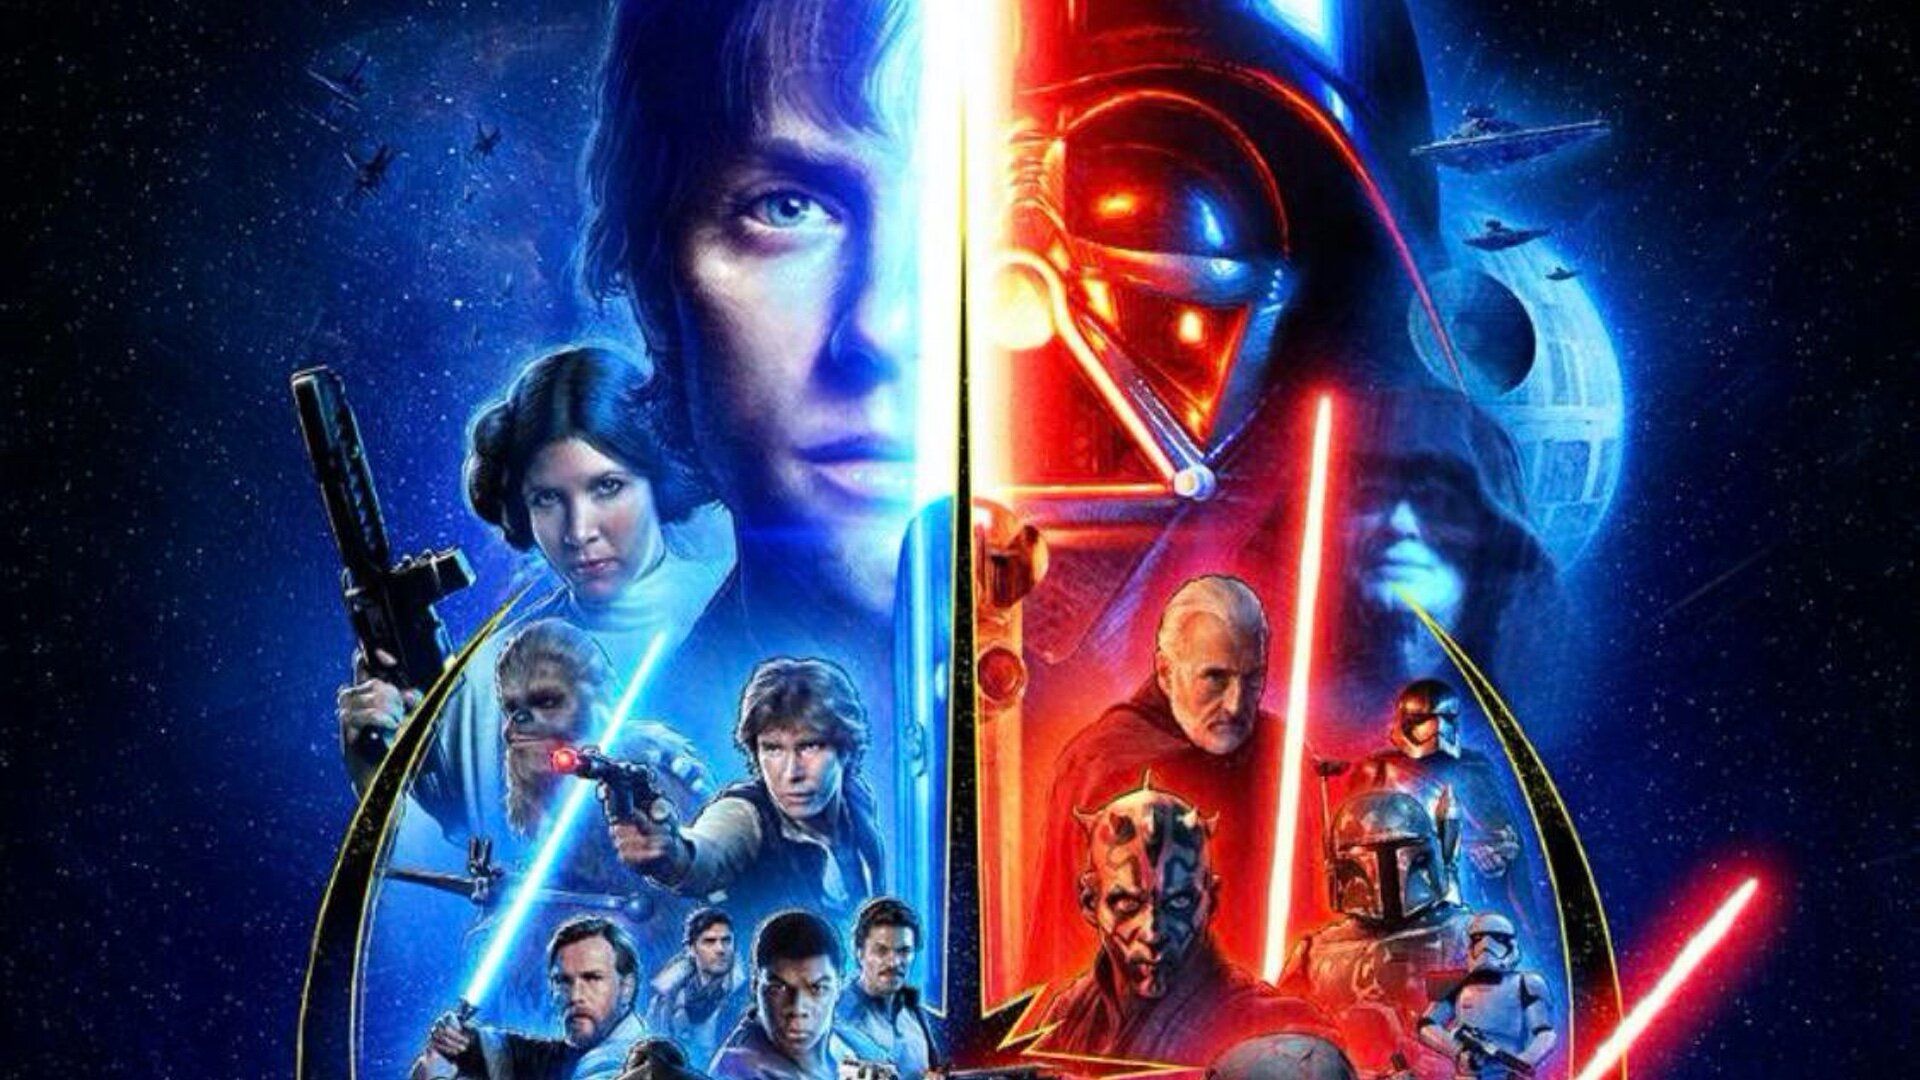 New STAR WARS Poster For The Skywalker Saga And Disney+ Shares Concept Art For Its May The 4th Takeover